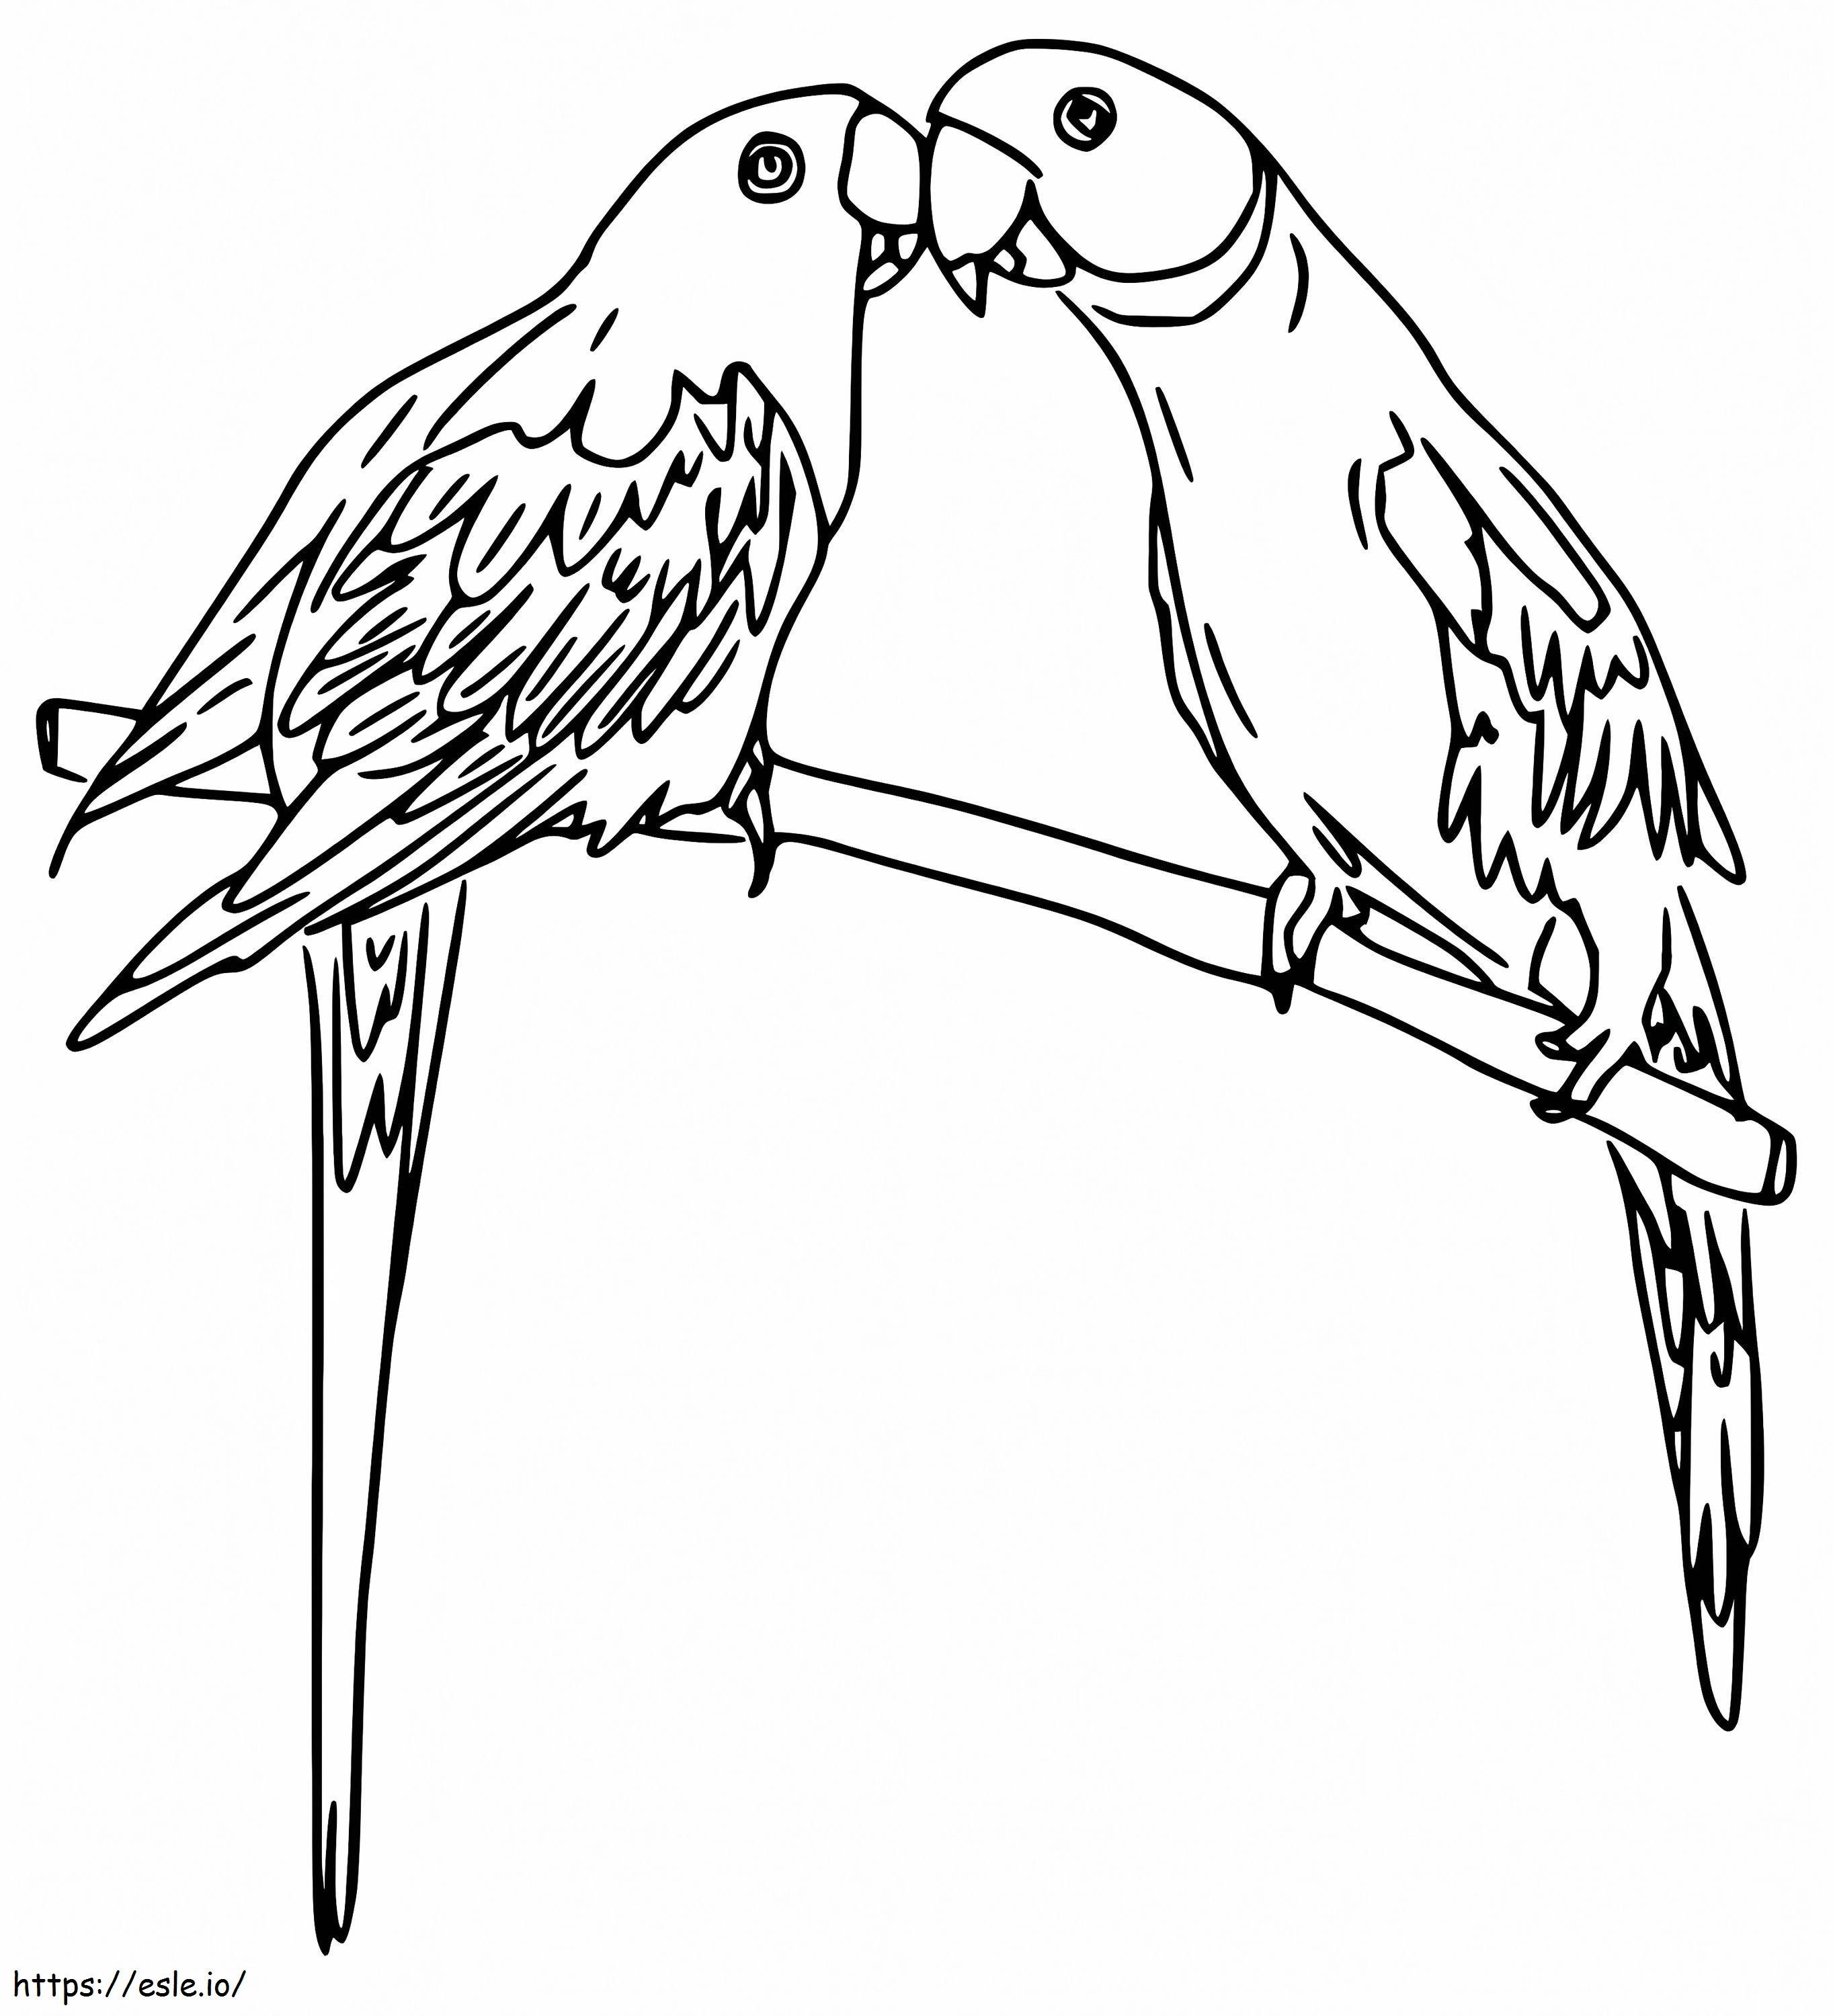 Printable Parakeets coloring page